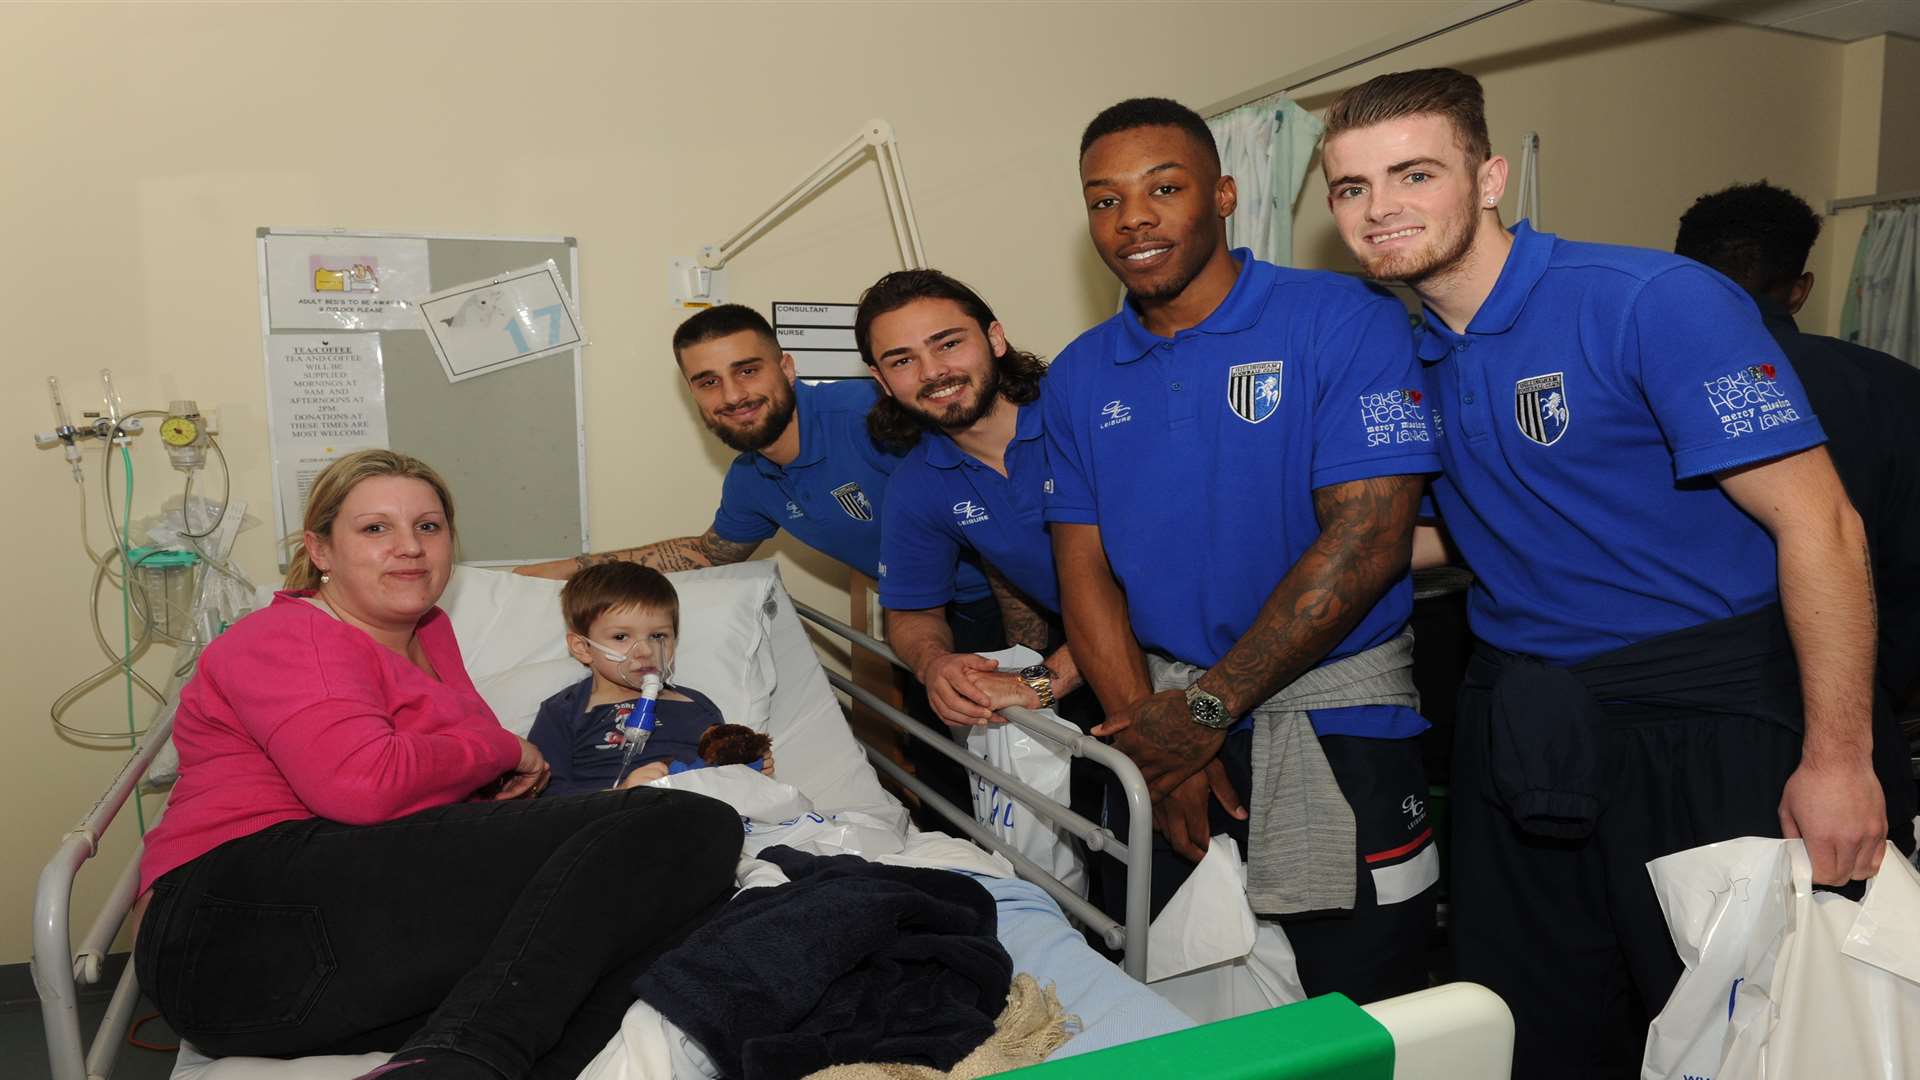 The players meet Michelle Pascoe and her four-year-old son Thomas